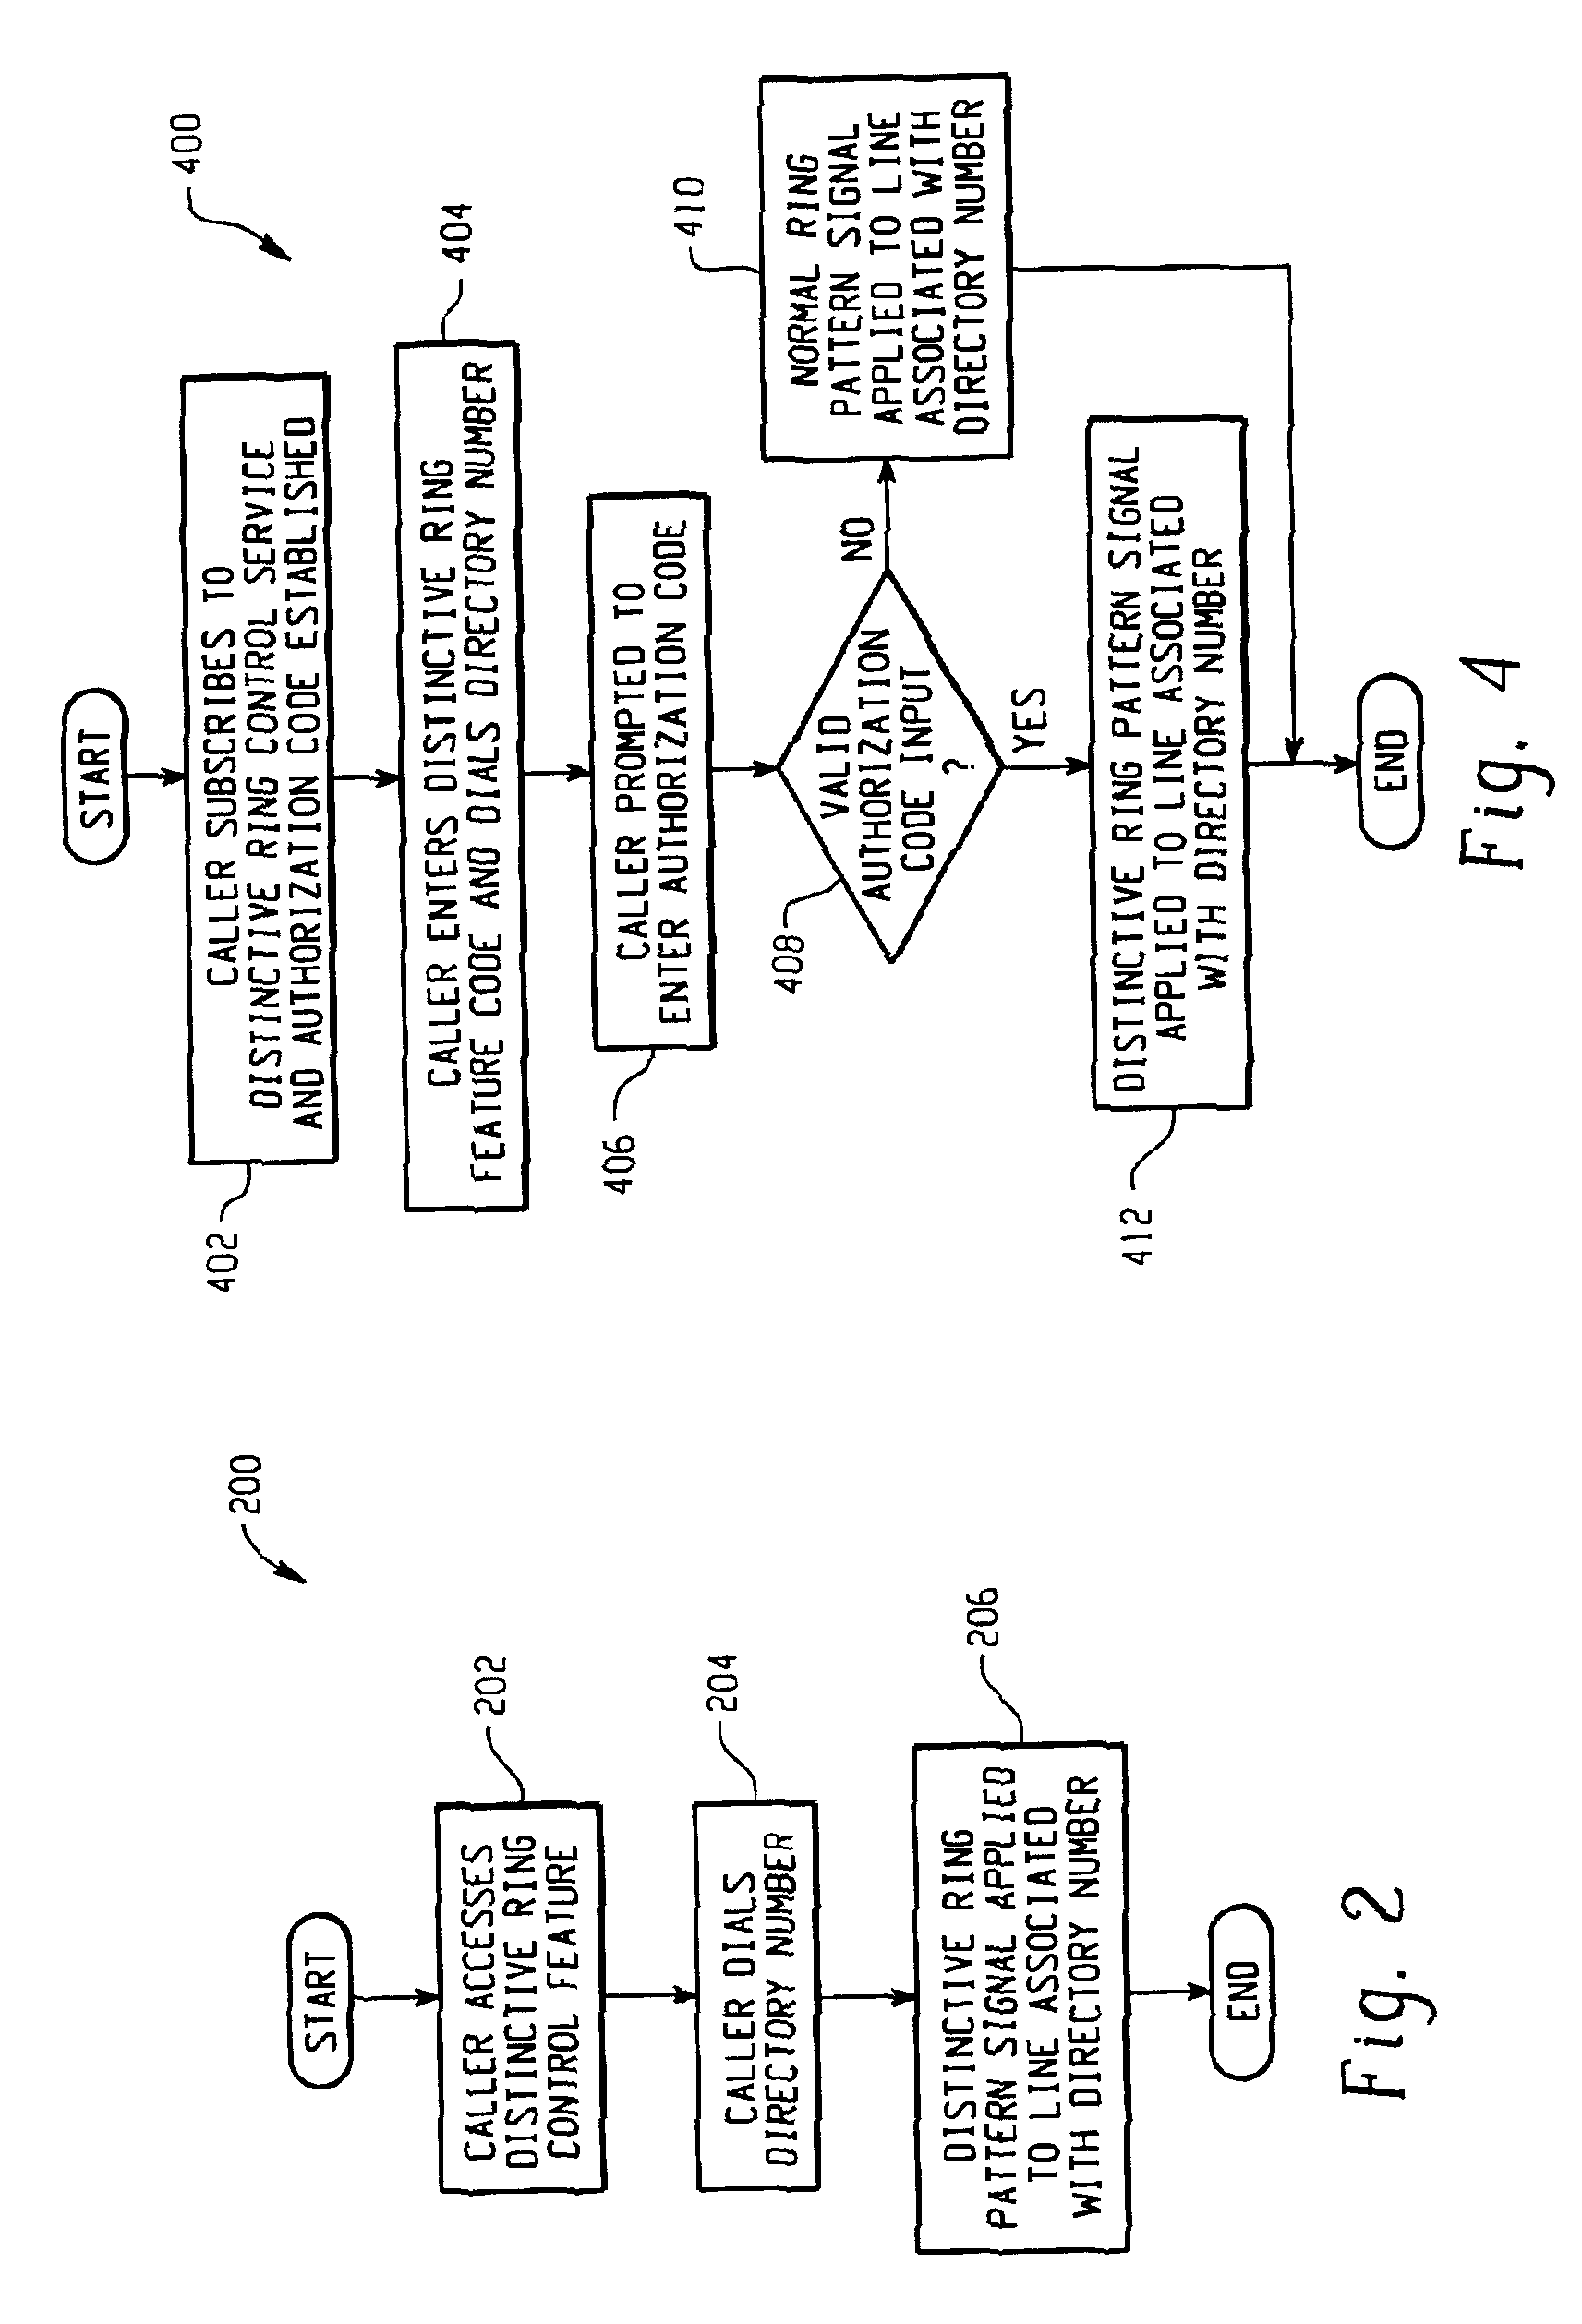 System and method for caller control of a distinctive ring